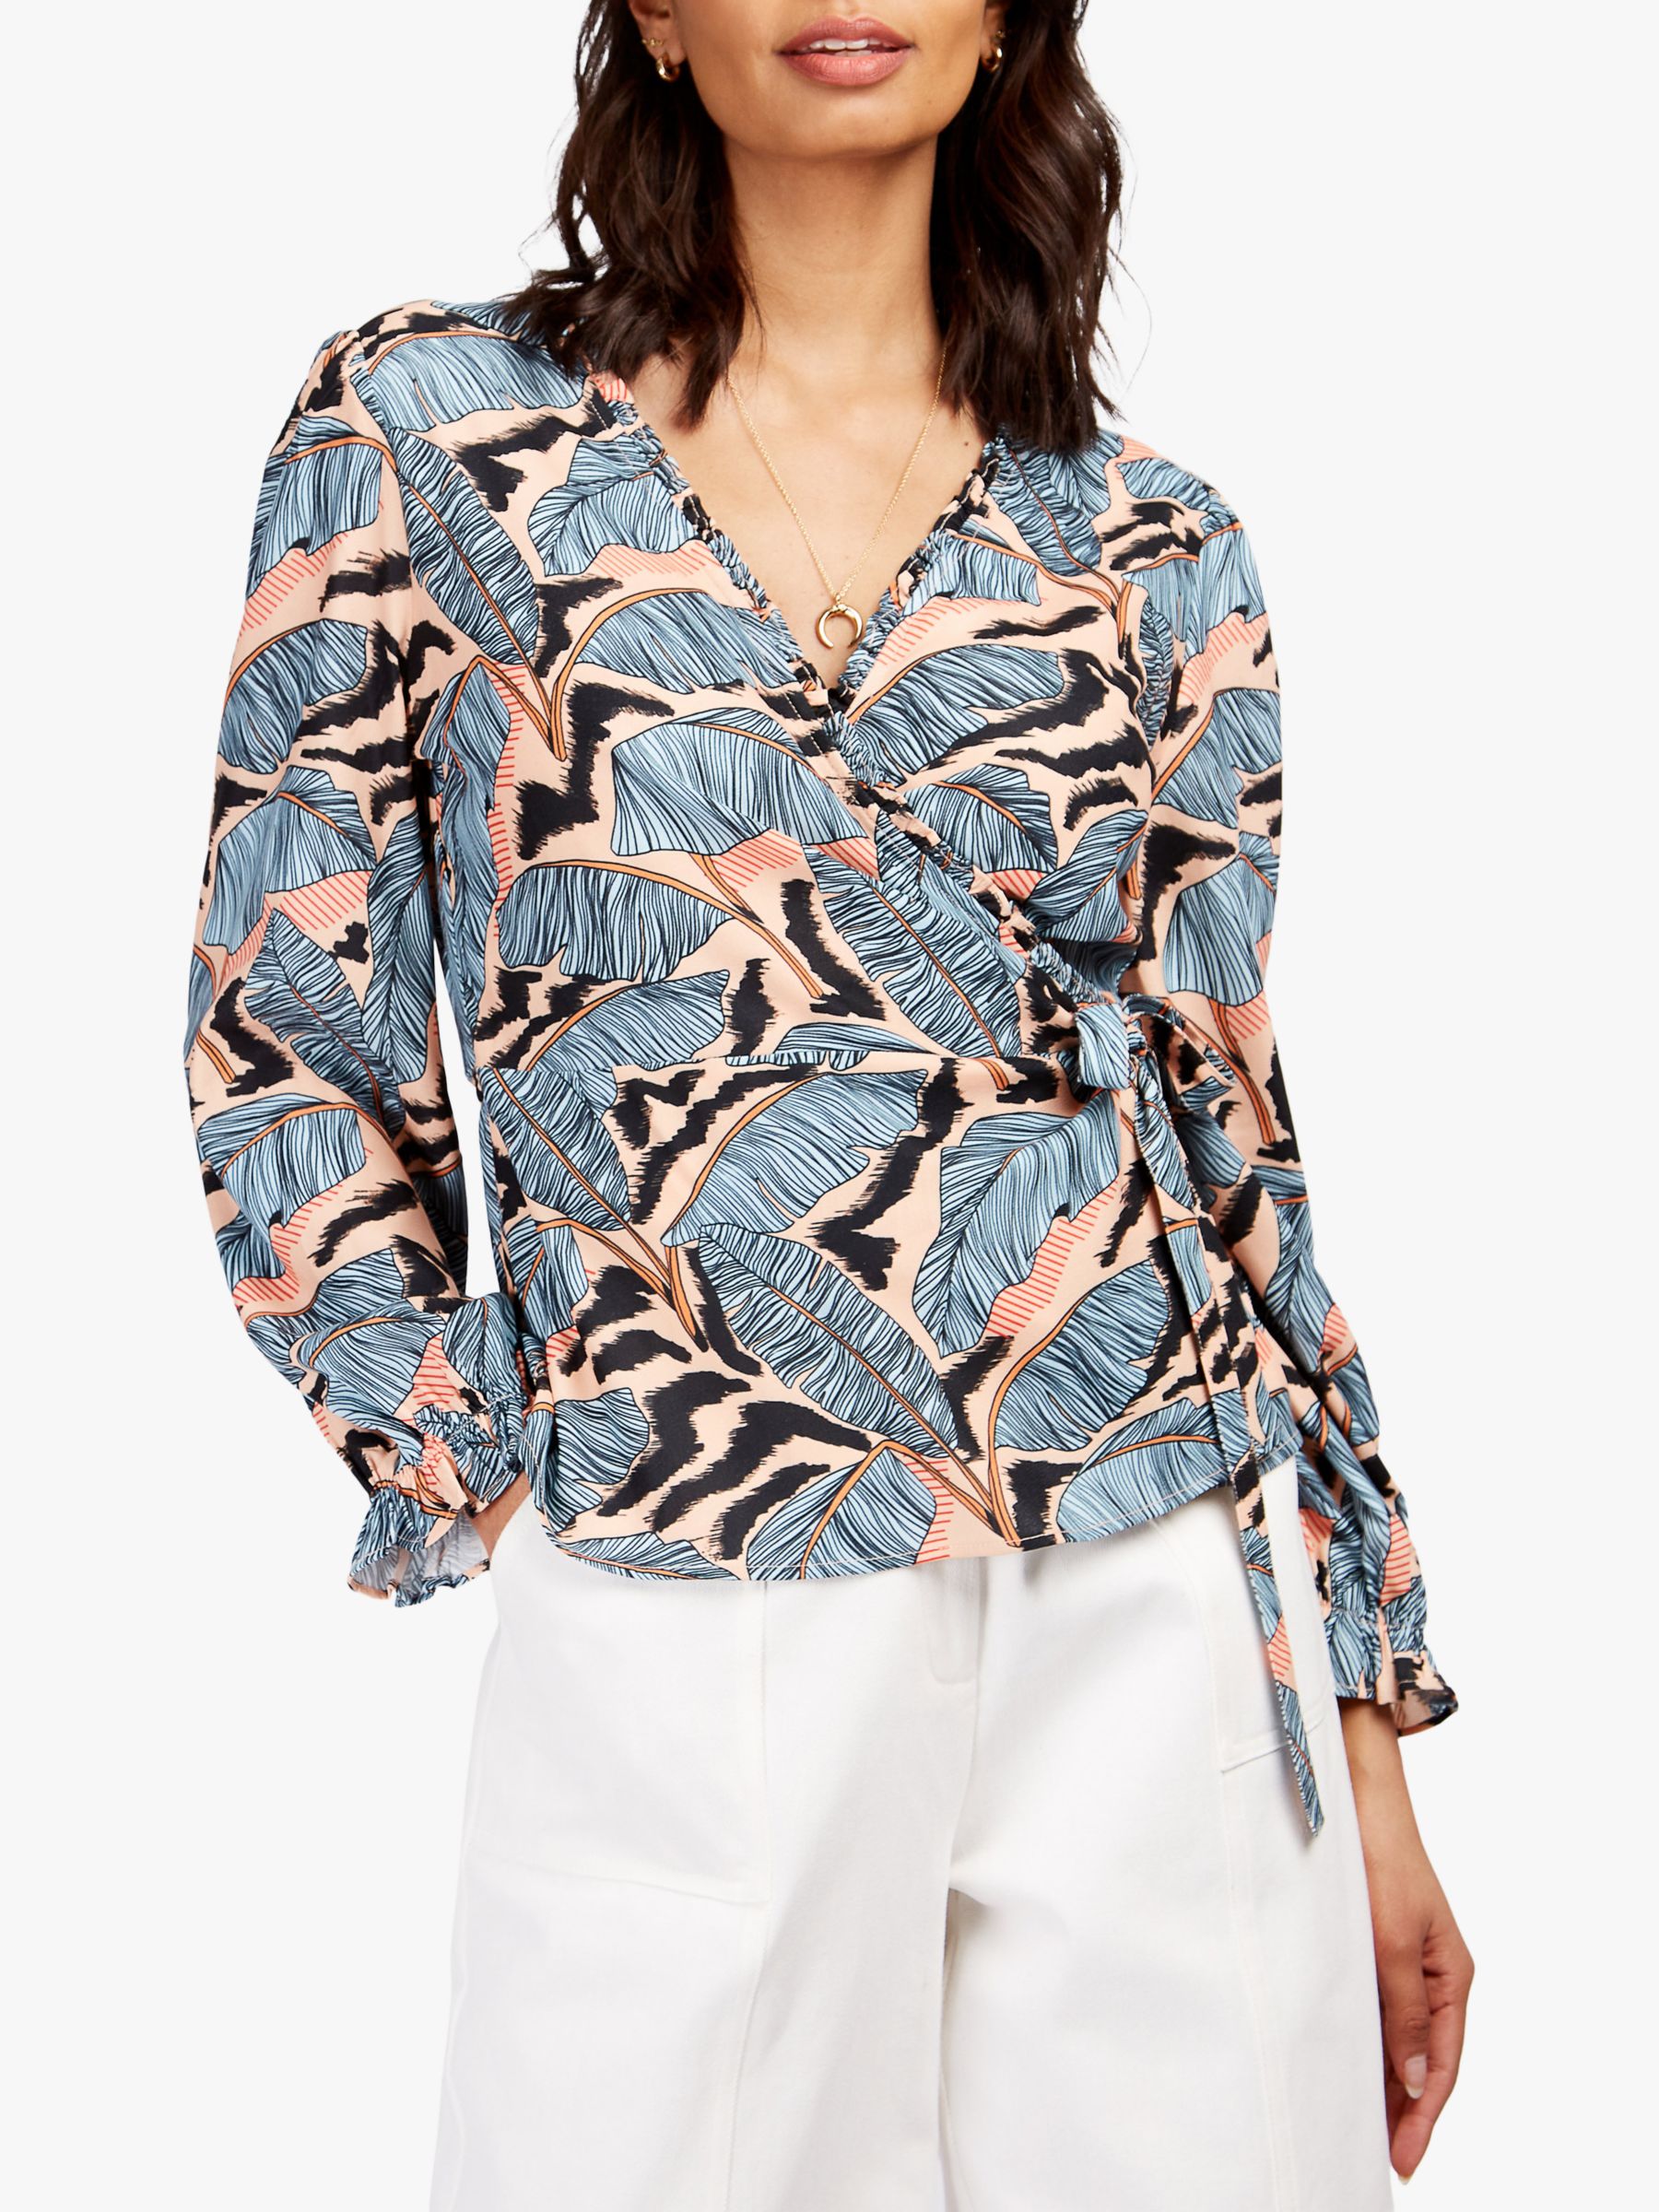 Somerset by Alice Temperley Banana Leaf Print Wrap Blouse, Multi, 10